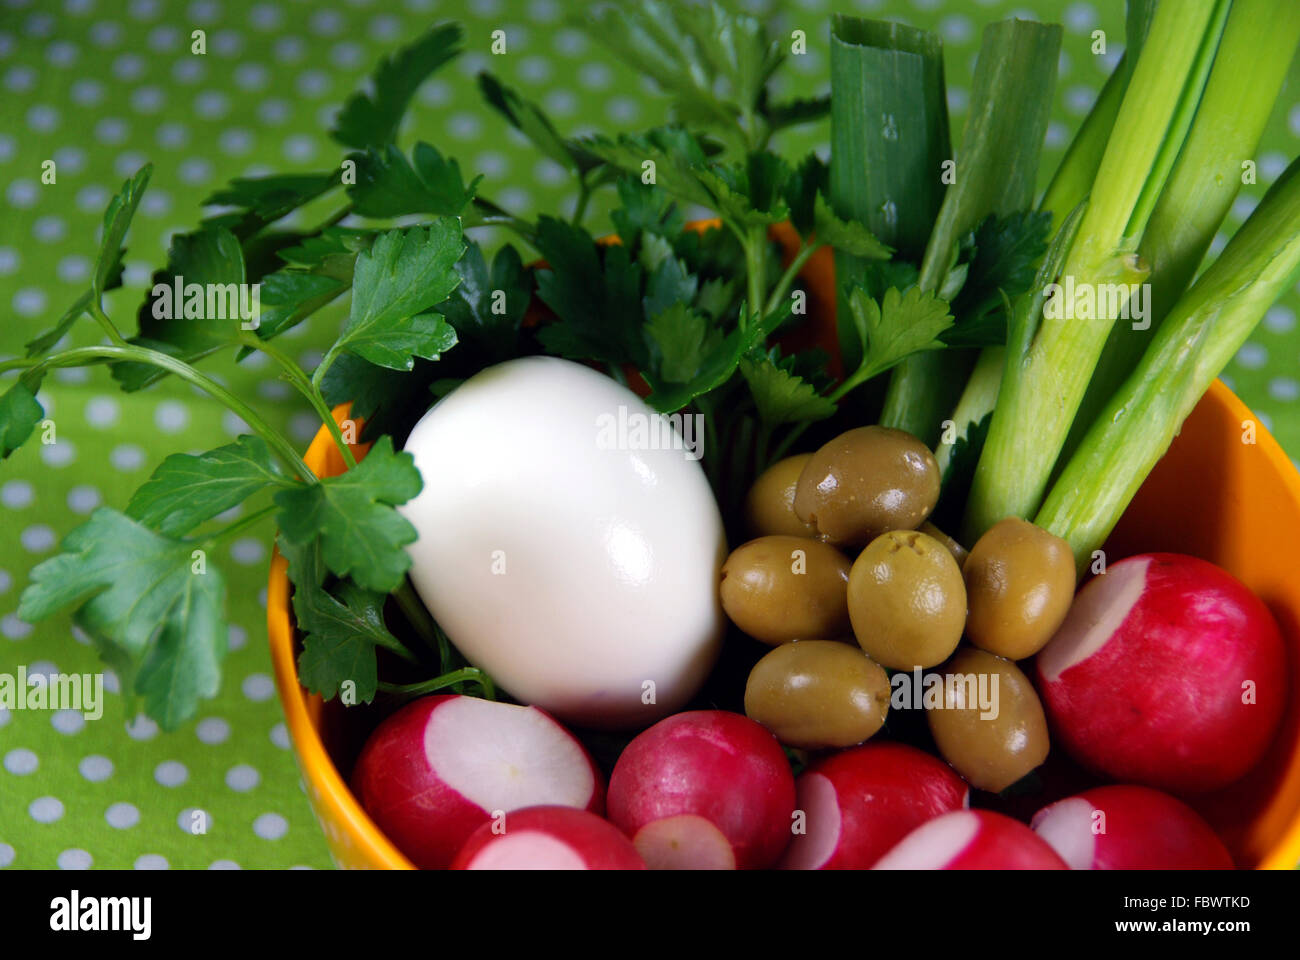 Dietary meal Stock Photo